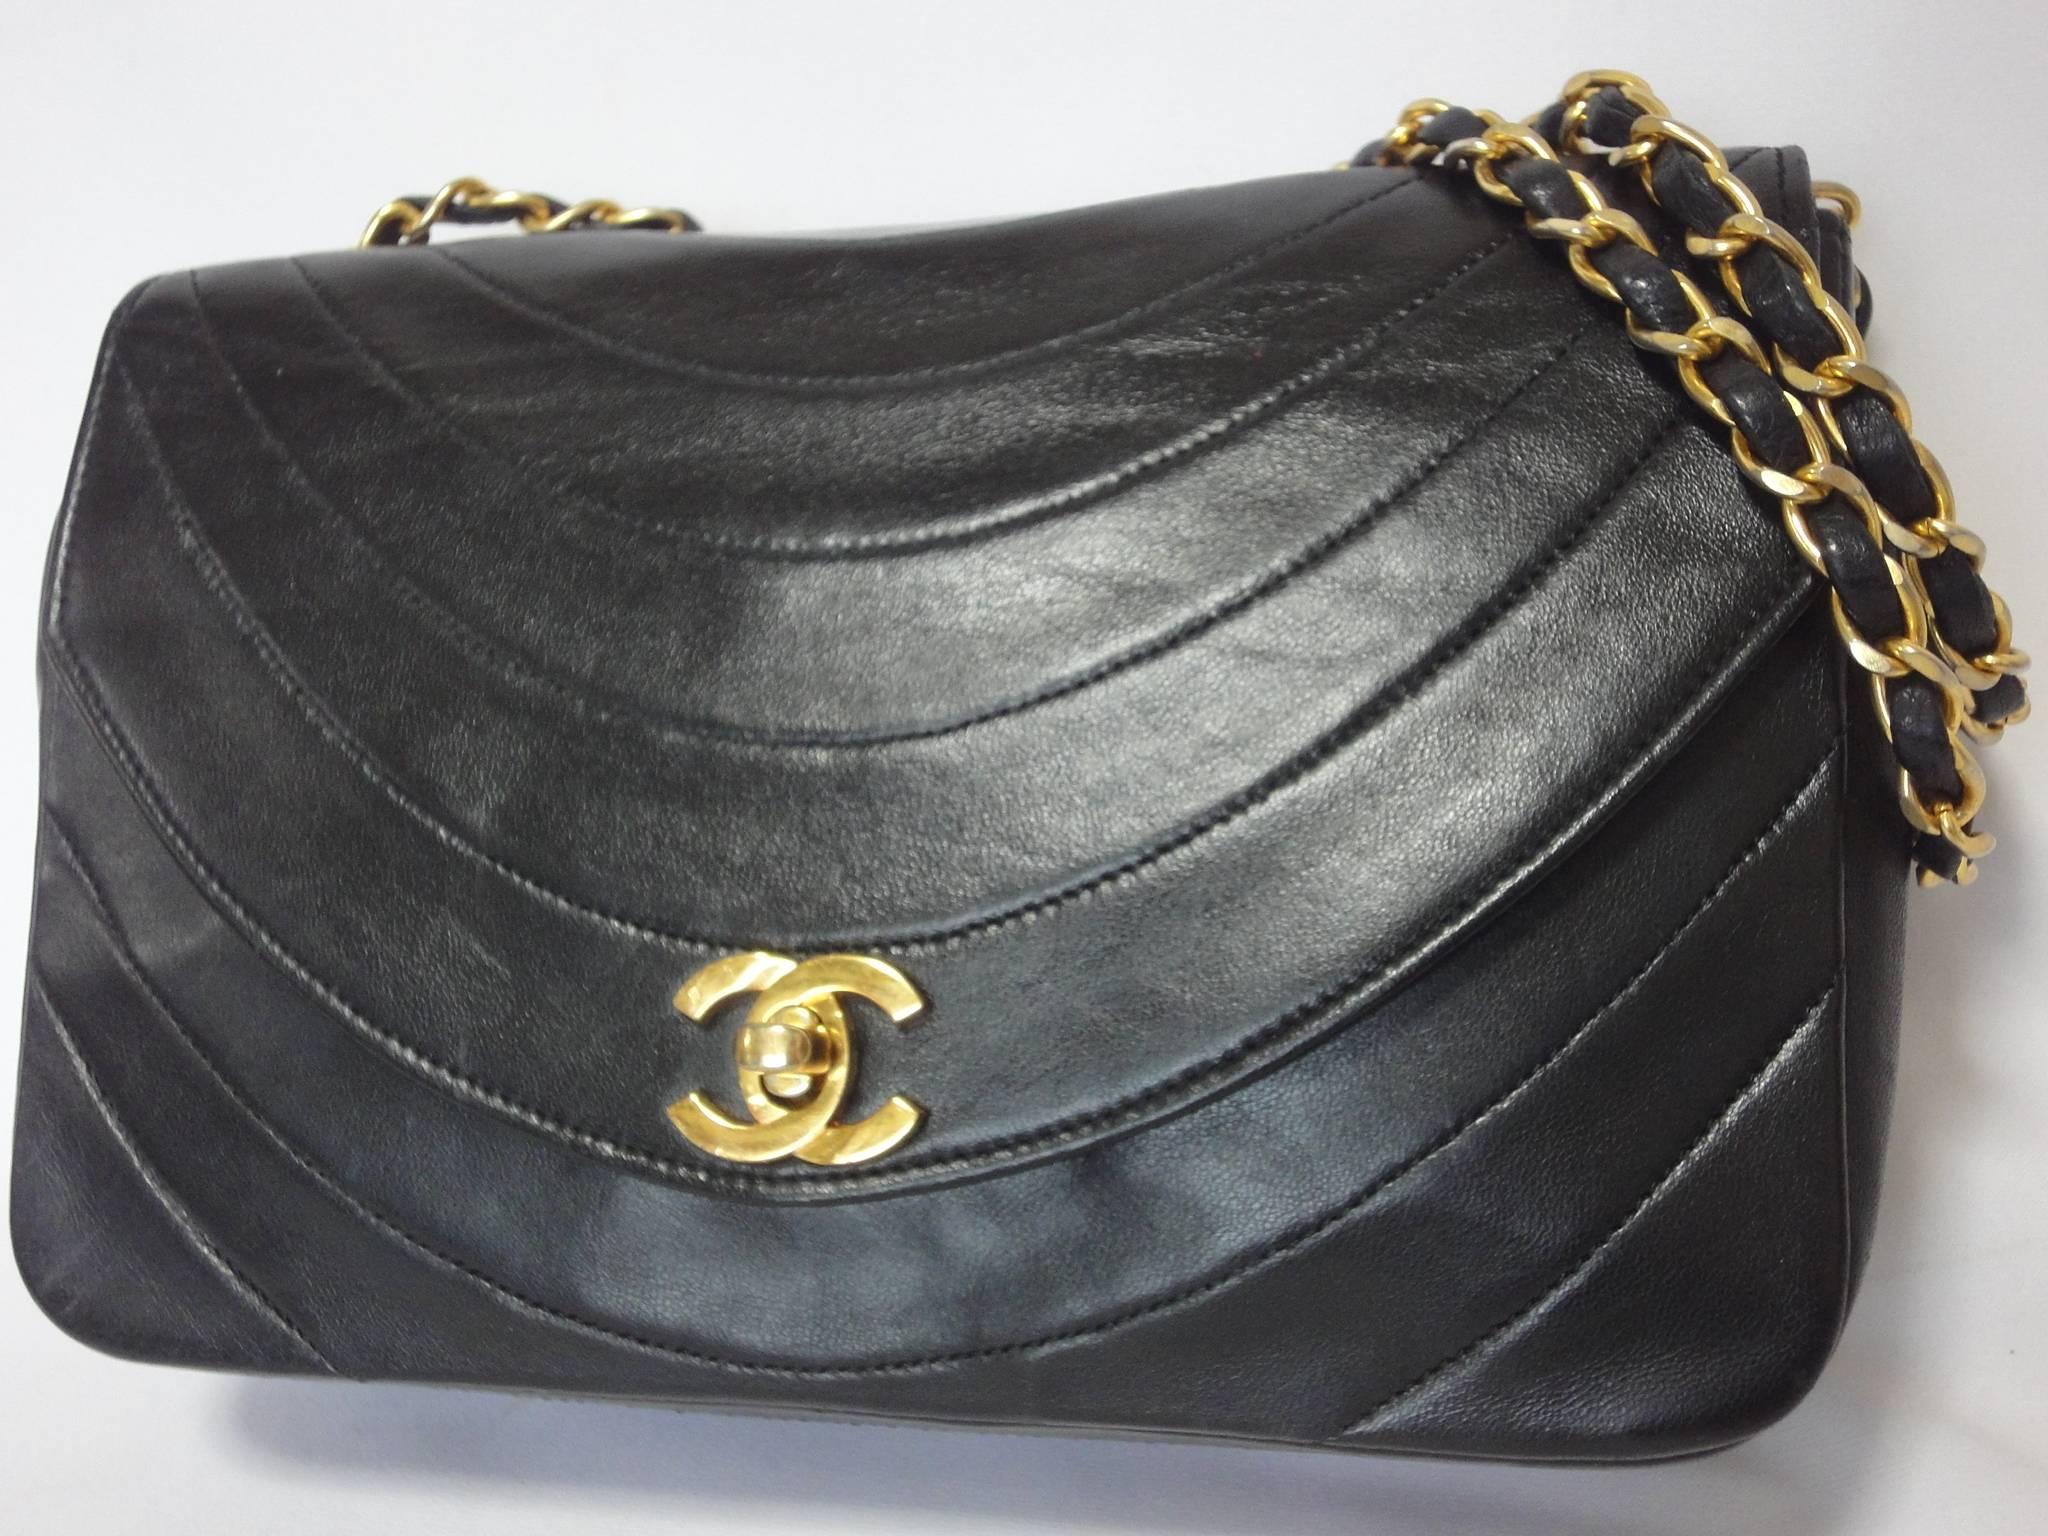 1980's Vintage CHANEL unique oval U stitch black lamb leather classic 2.55 flap chain shoulder bag. Must have rare purse France limited.

If you are a vintage CHANEL lover/collector, then this is a must-have piece for your collection!
Introducing